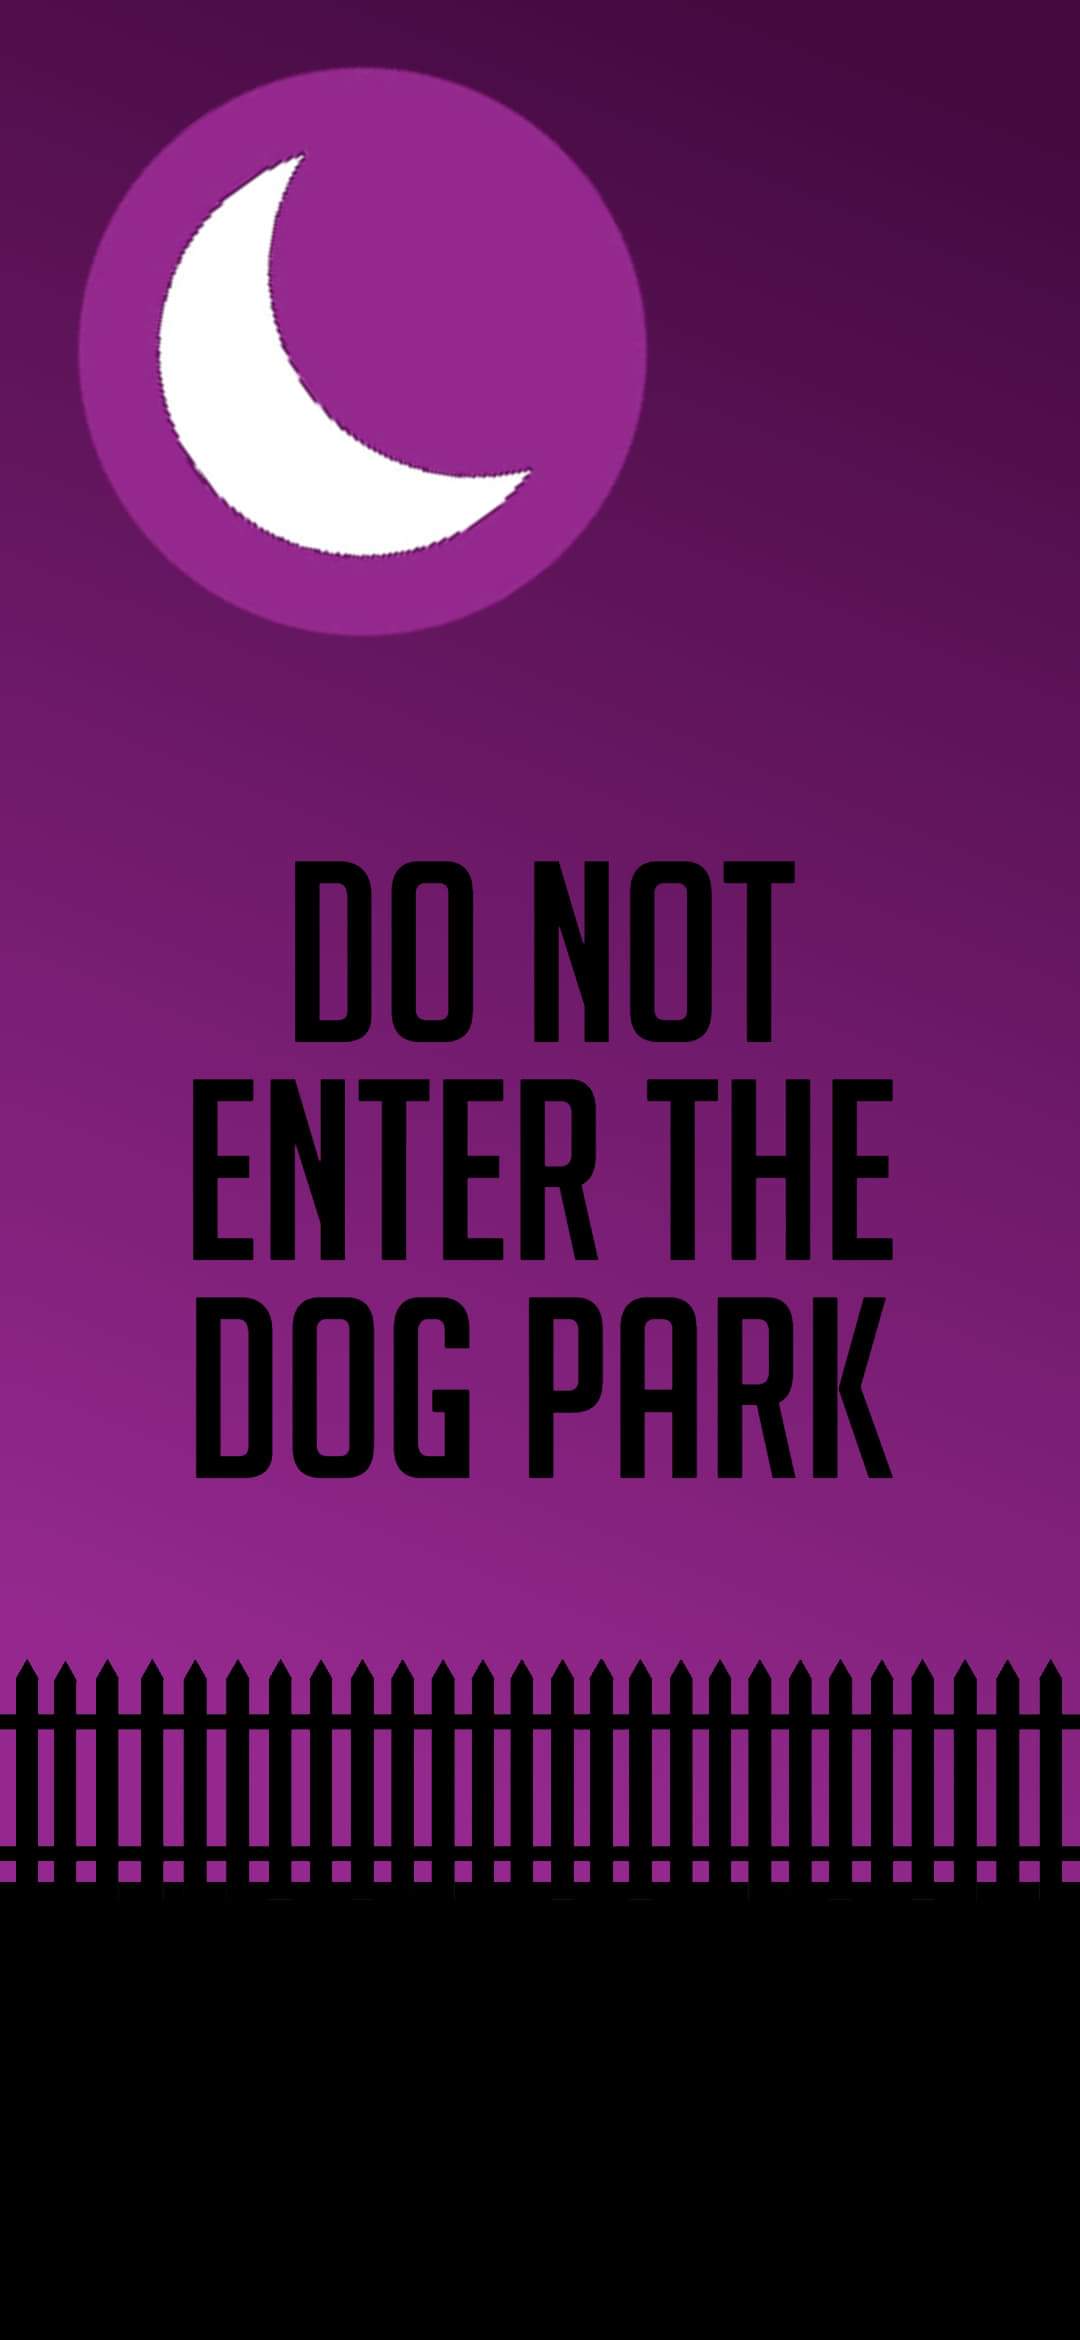 Do NOT enter the dog park another wallpaper I made!